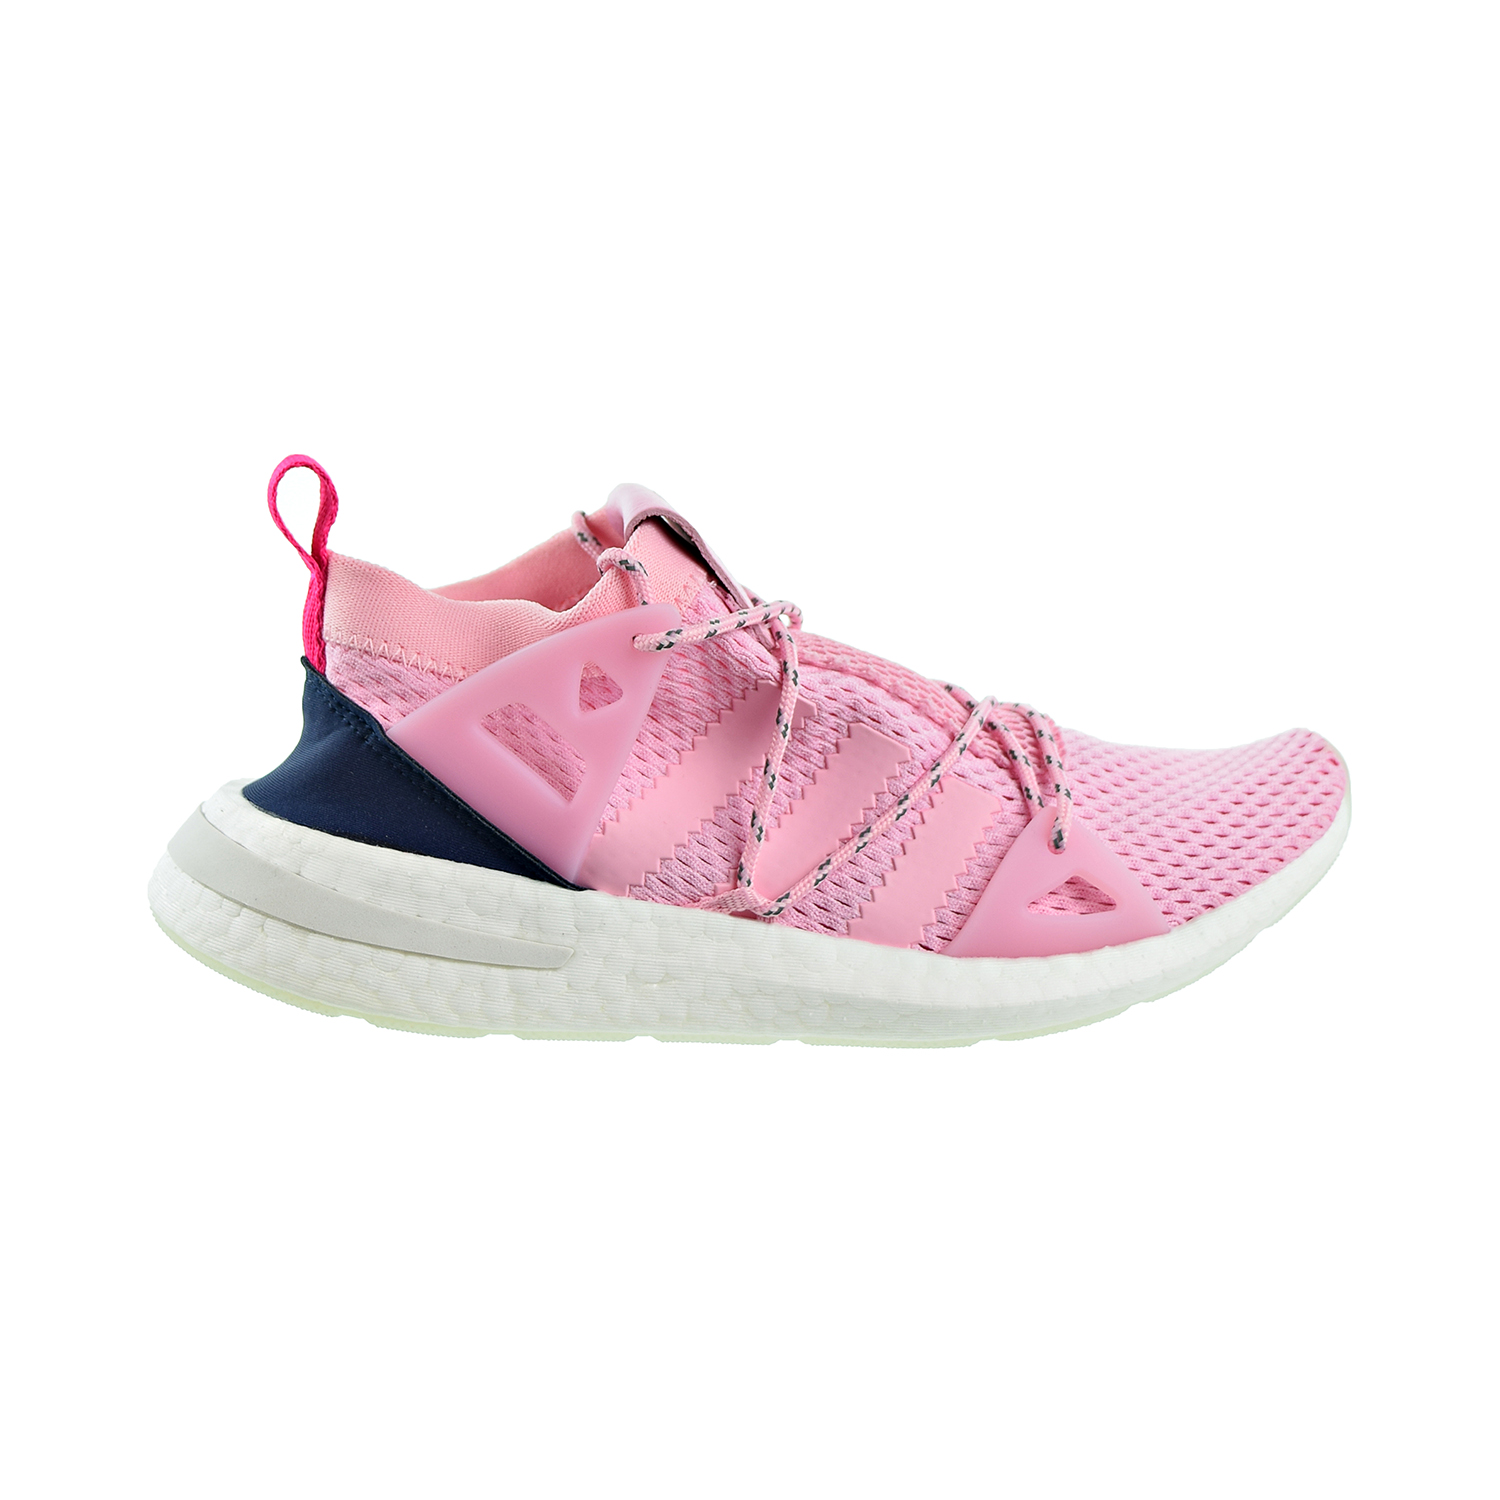 adidas pink rubber shoes